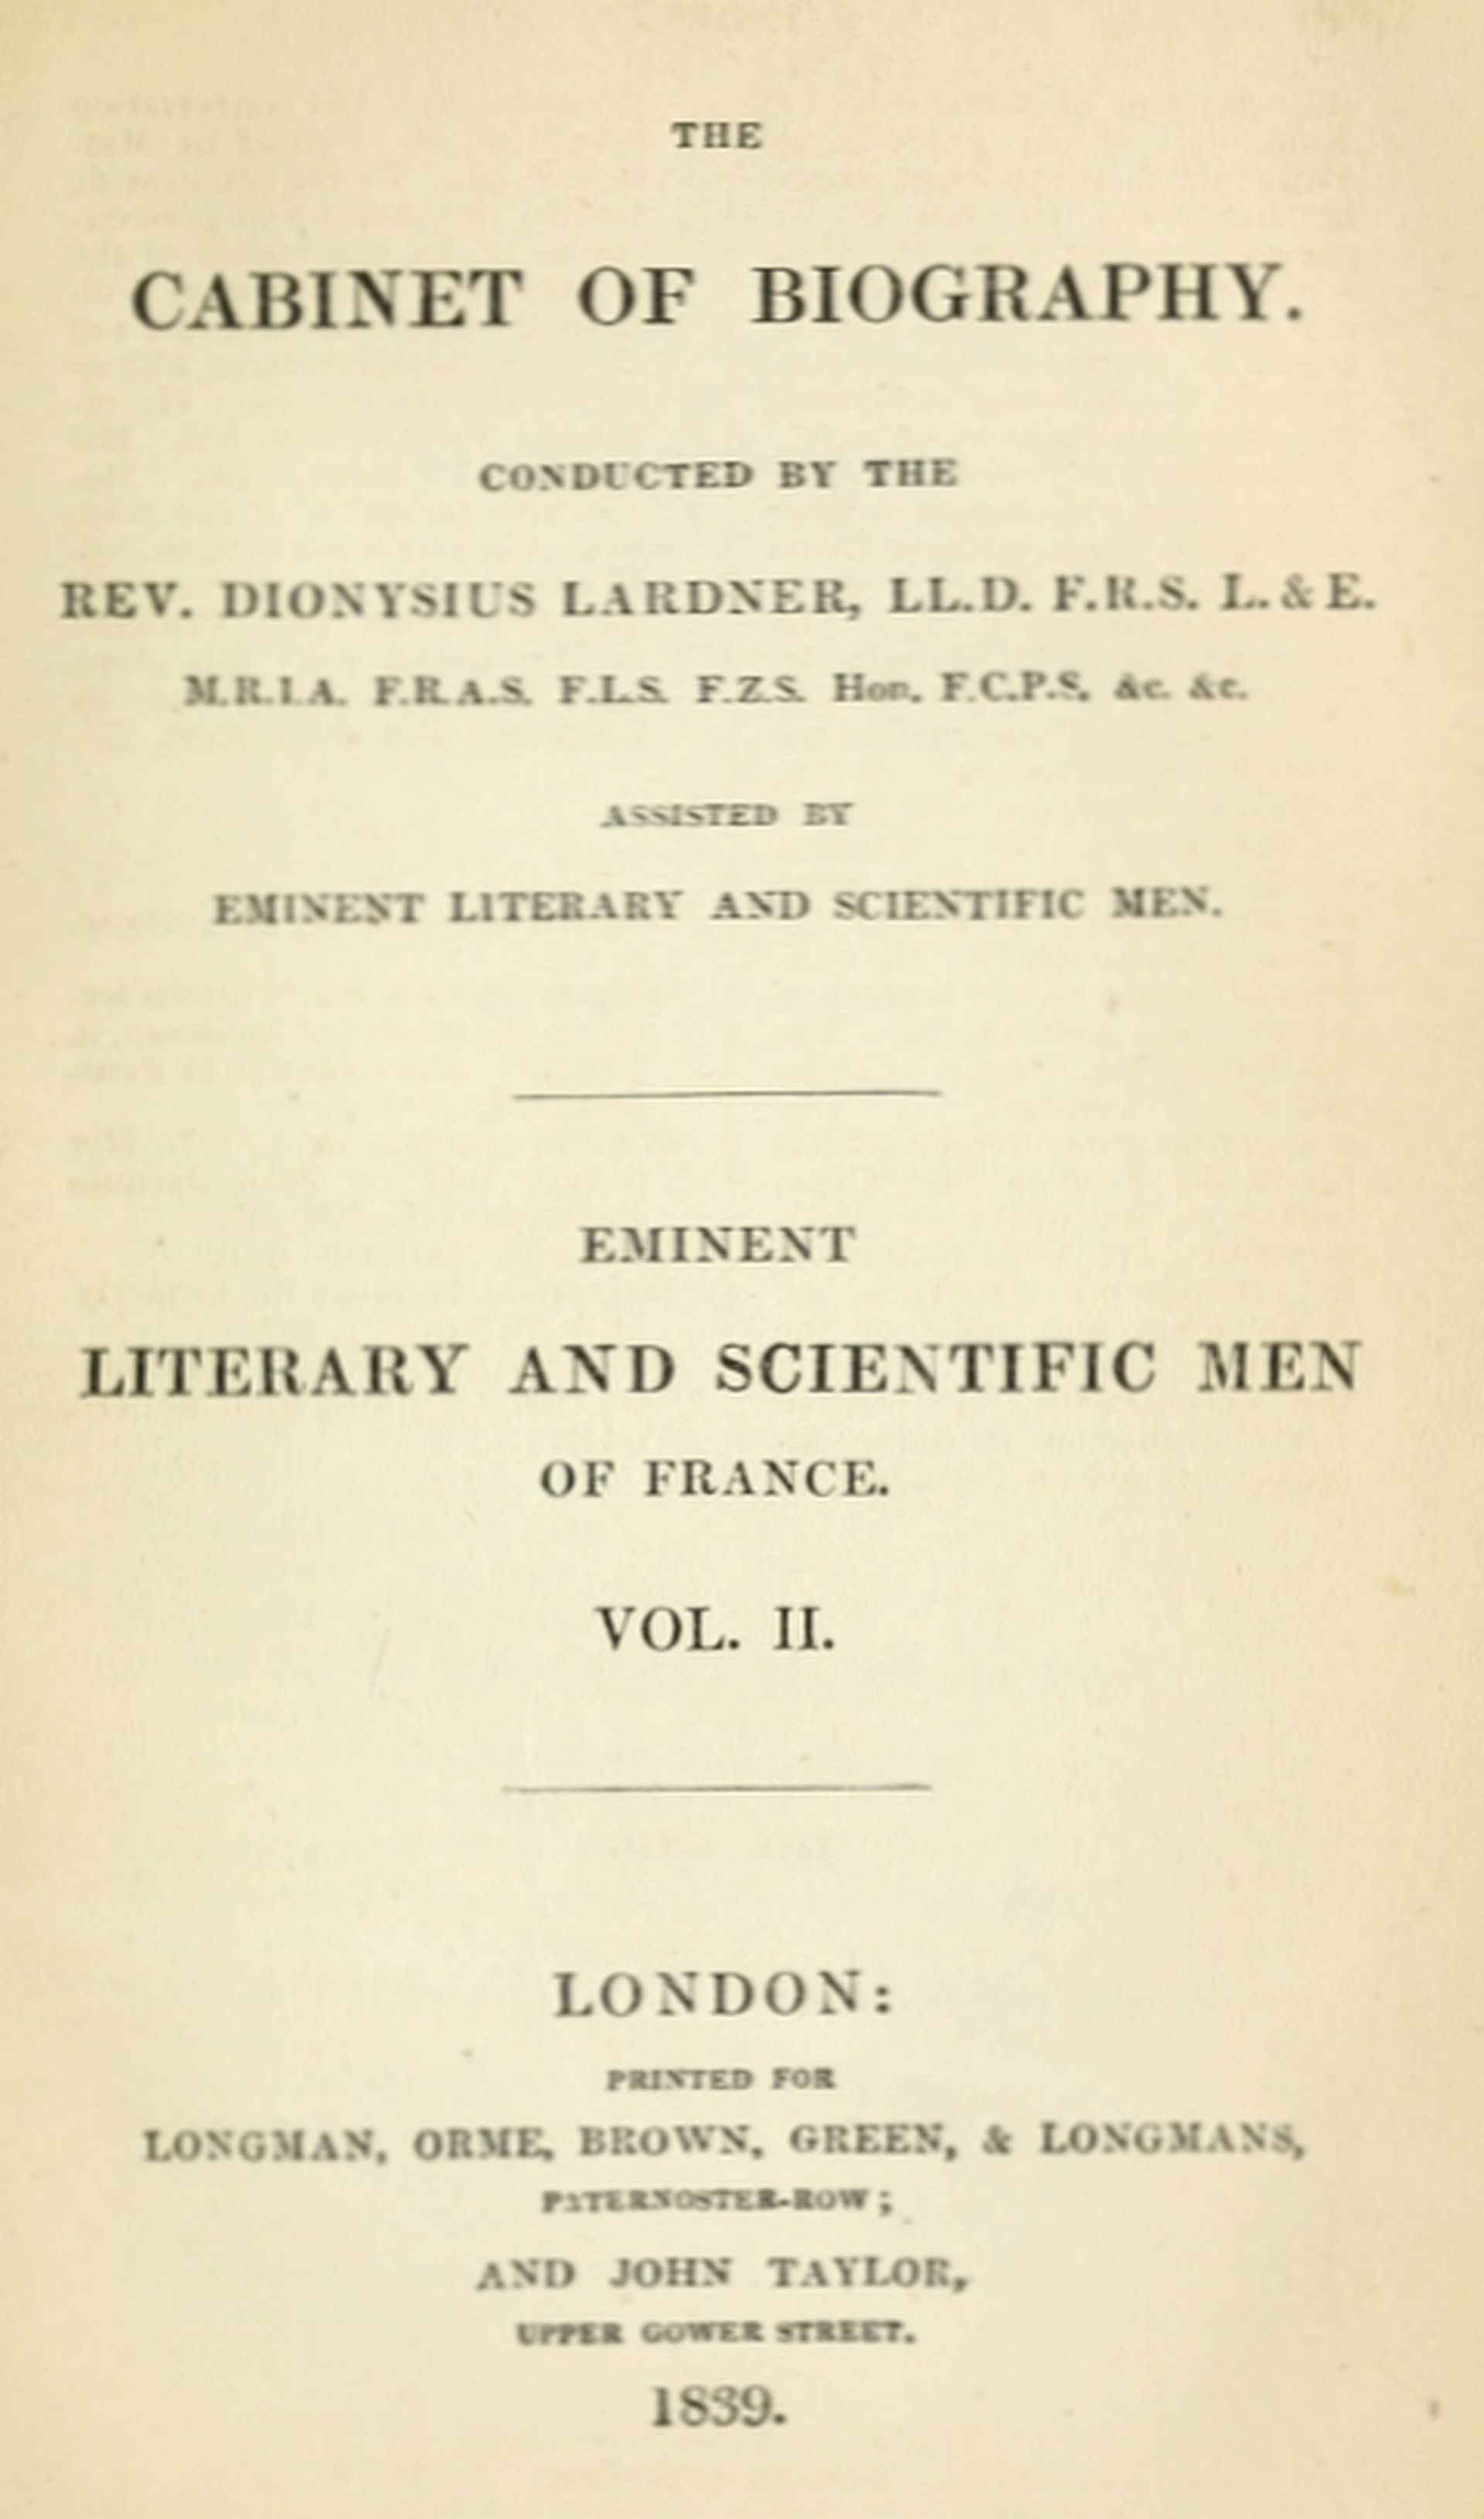 The Project Gutenberg eBook of Eminent literary and scientific men of France,